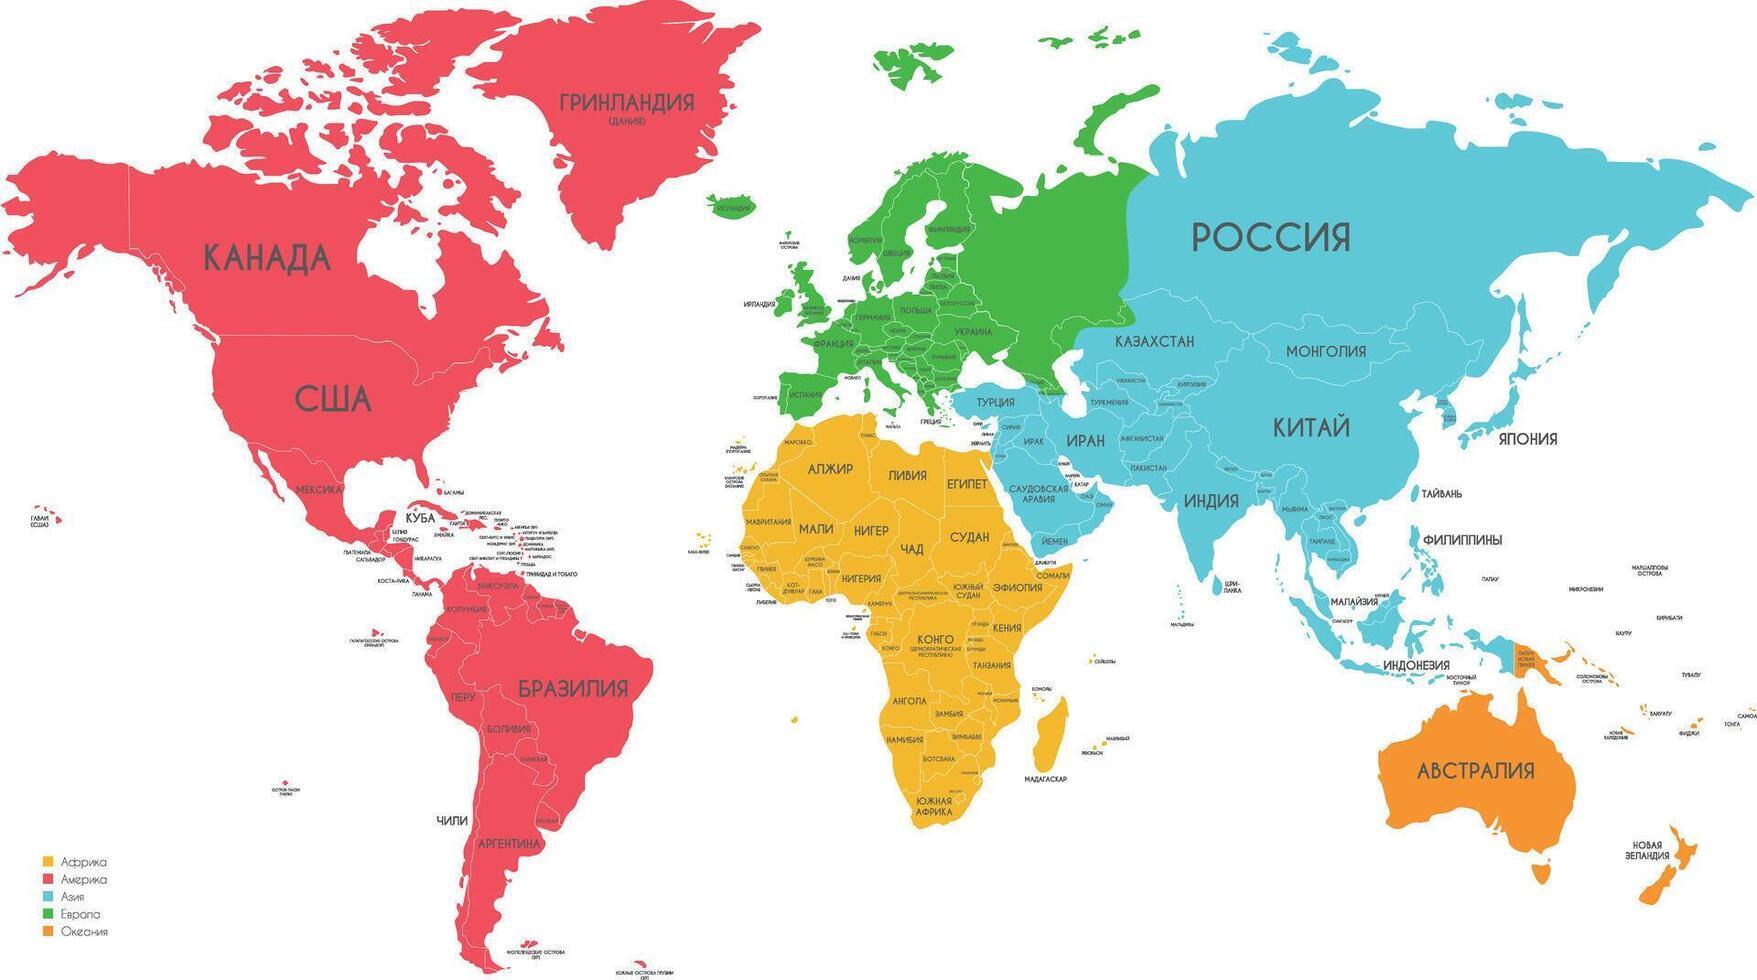 Political World Map vector illustration with different colors for each continent and isolated on white background  with country names in russian. Editable and clearly labeled layers.